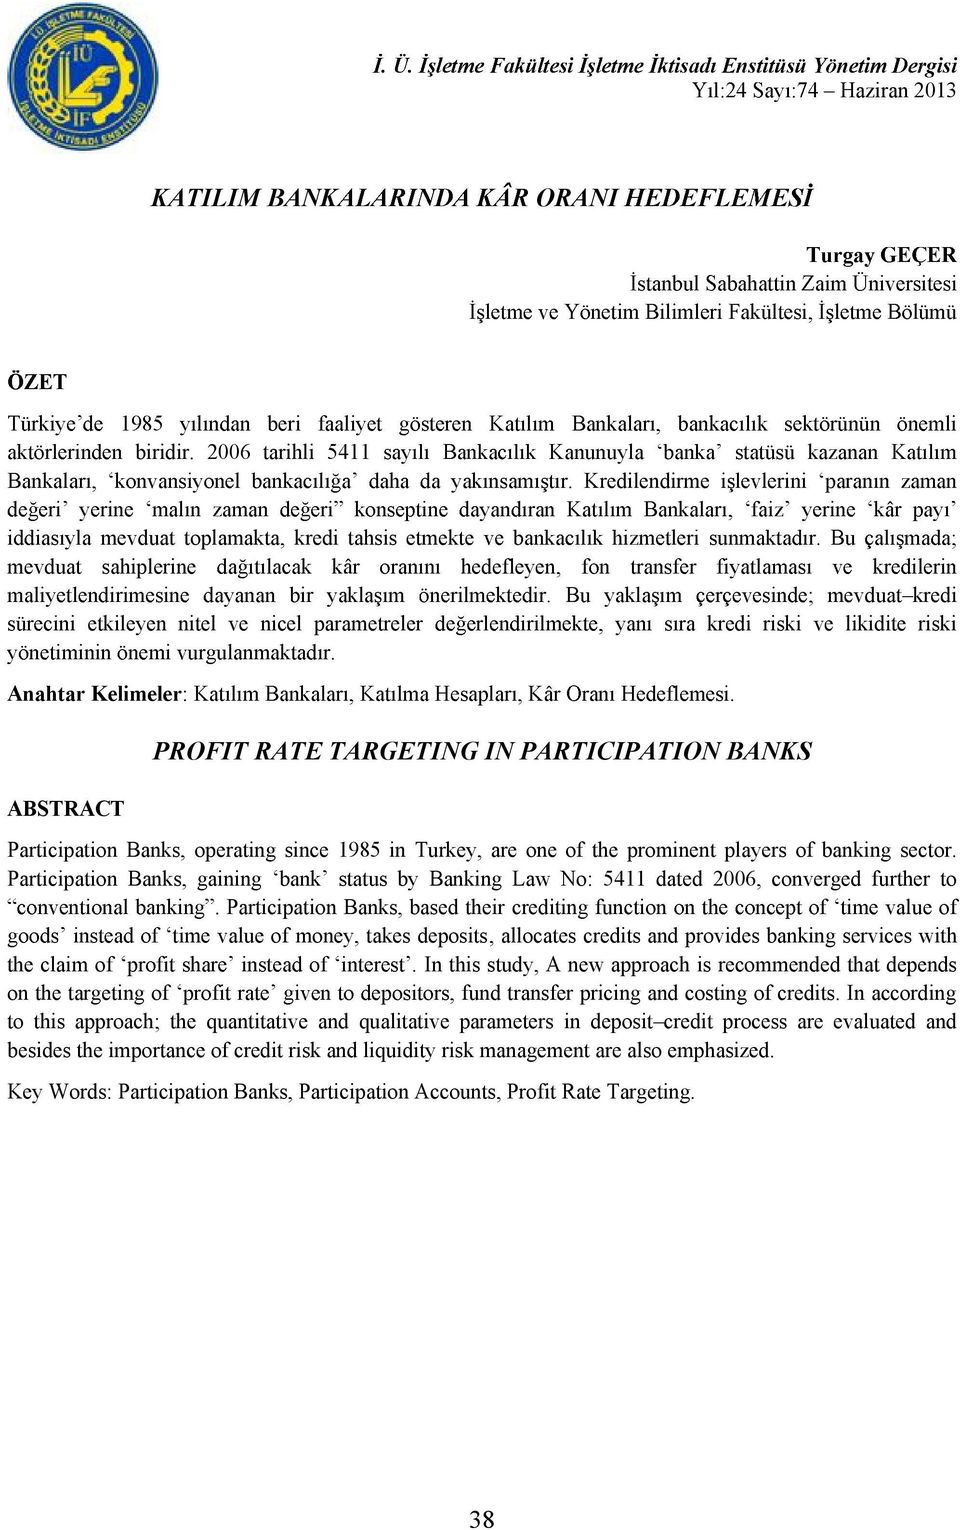 kredi riski ve likidite riski PROFIT RATE TARGETING IN PARTICIPATION BANKS ABSTRACT Participation Banks, operating since 1985 in Turkey, are one of the prominent players of banking sector.